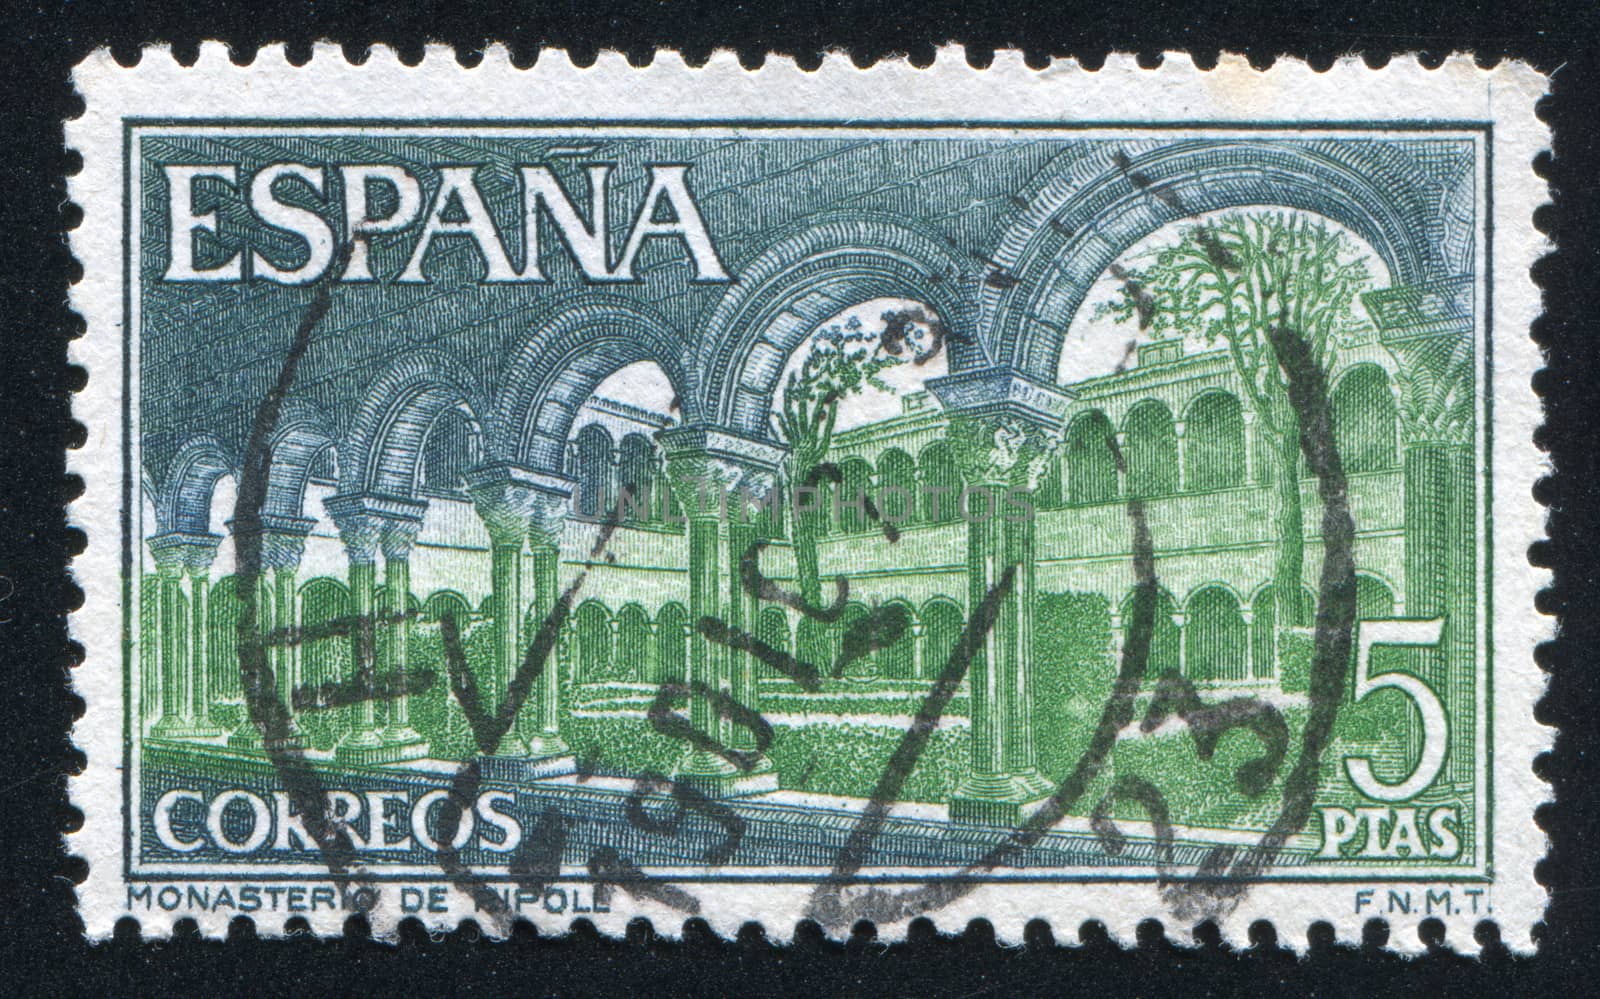 SPAIN - CIRCA 1970: stamp printed by Spain, shows Ripoll Monastery, Inside court, circa 1970